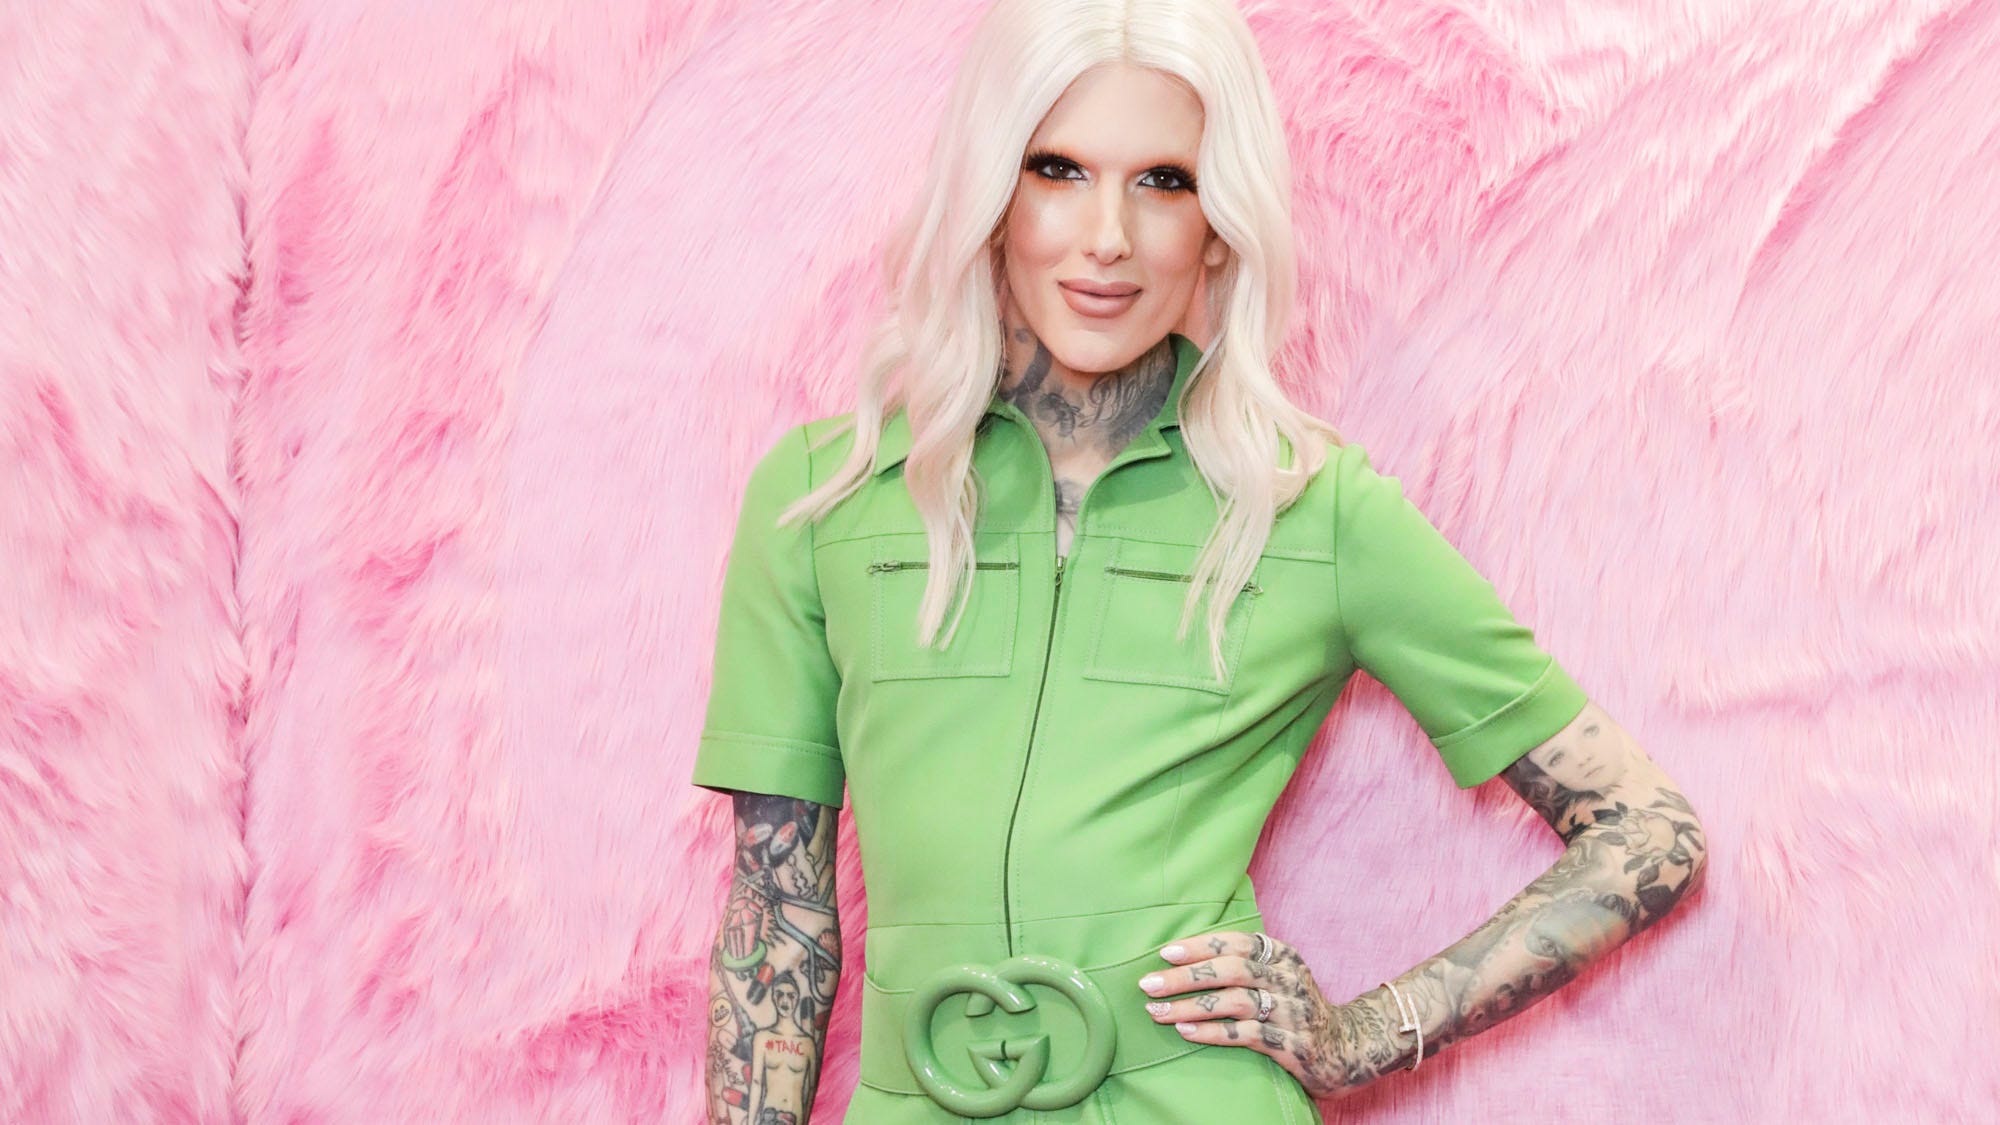 Jeffree Star hospitalized following ‘severe car accident’ that flipped vehicle three times